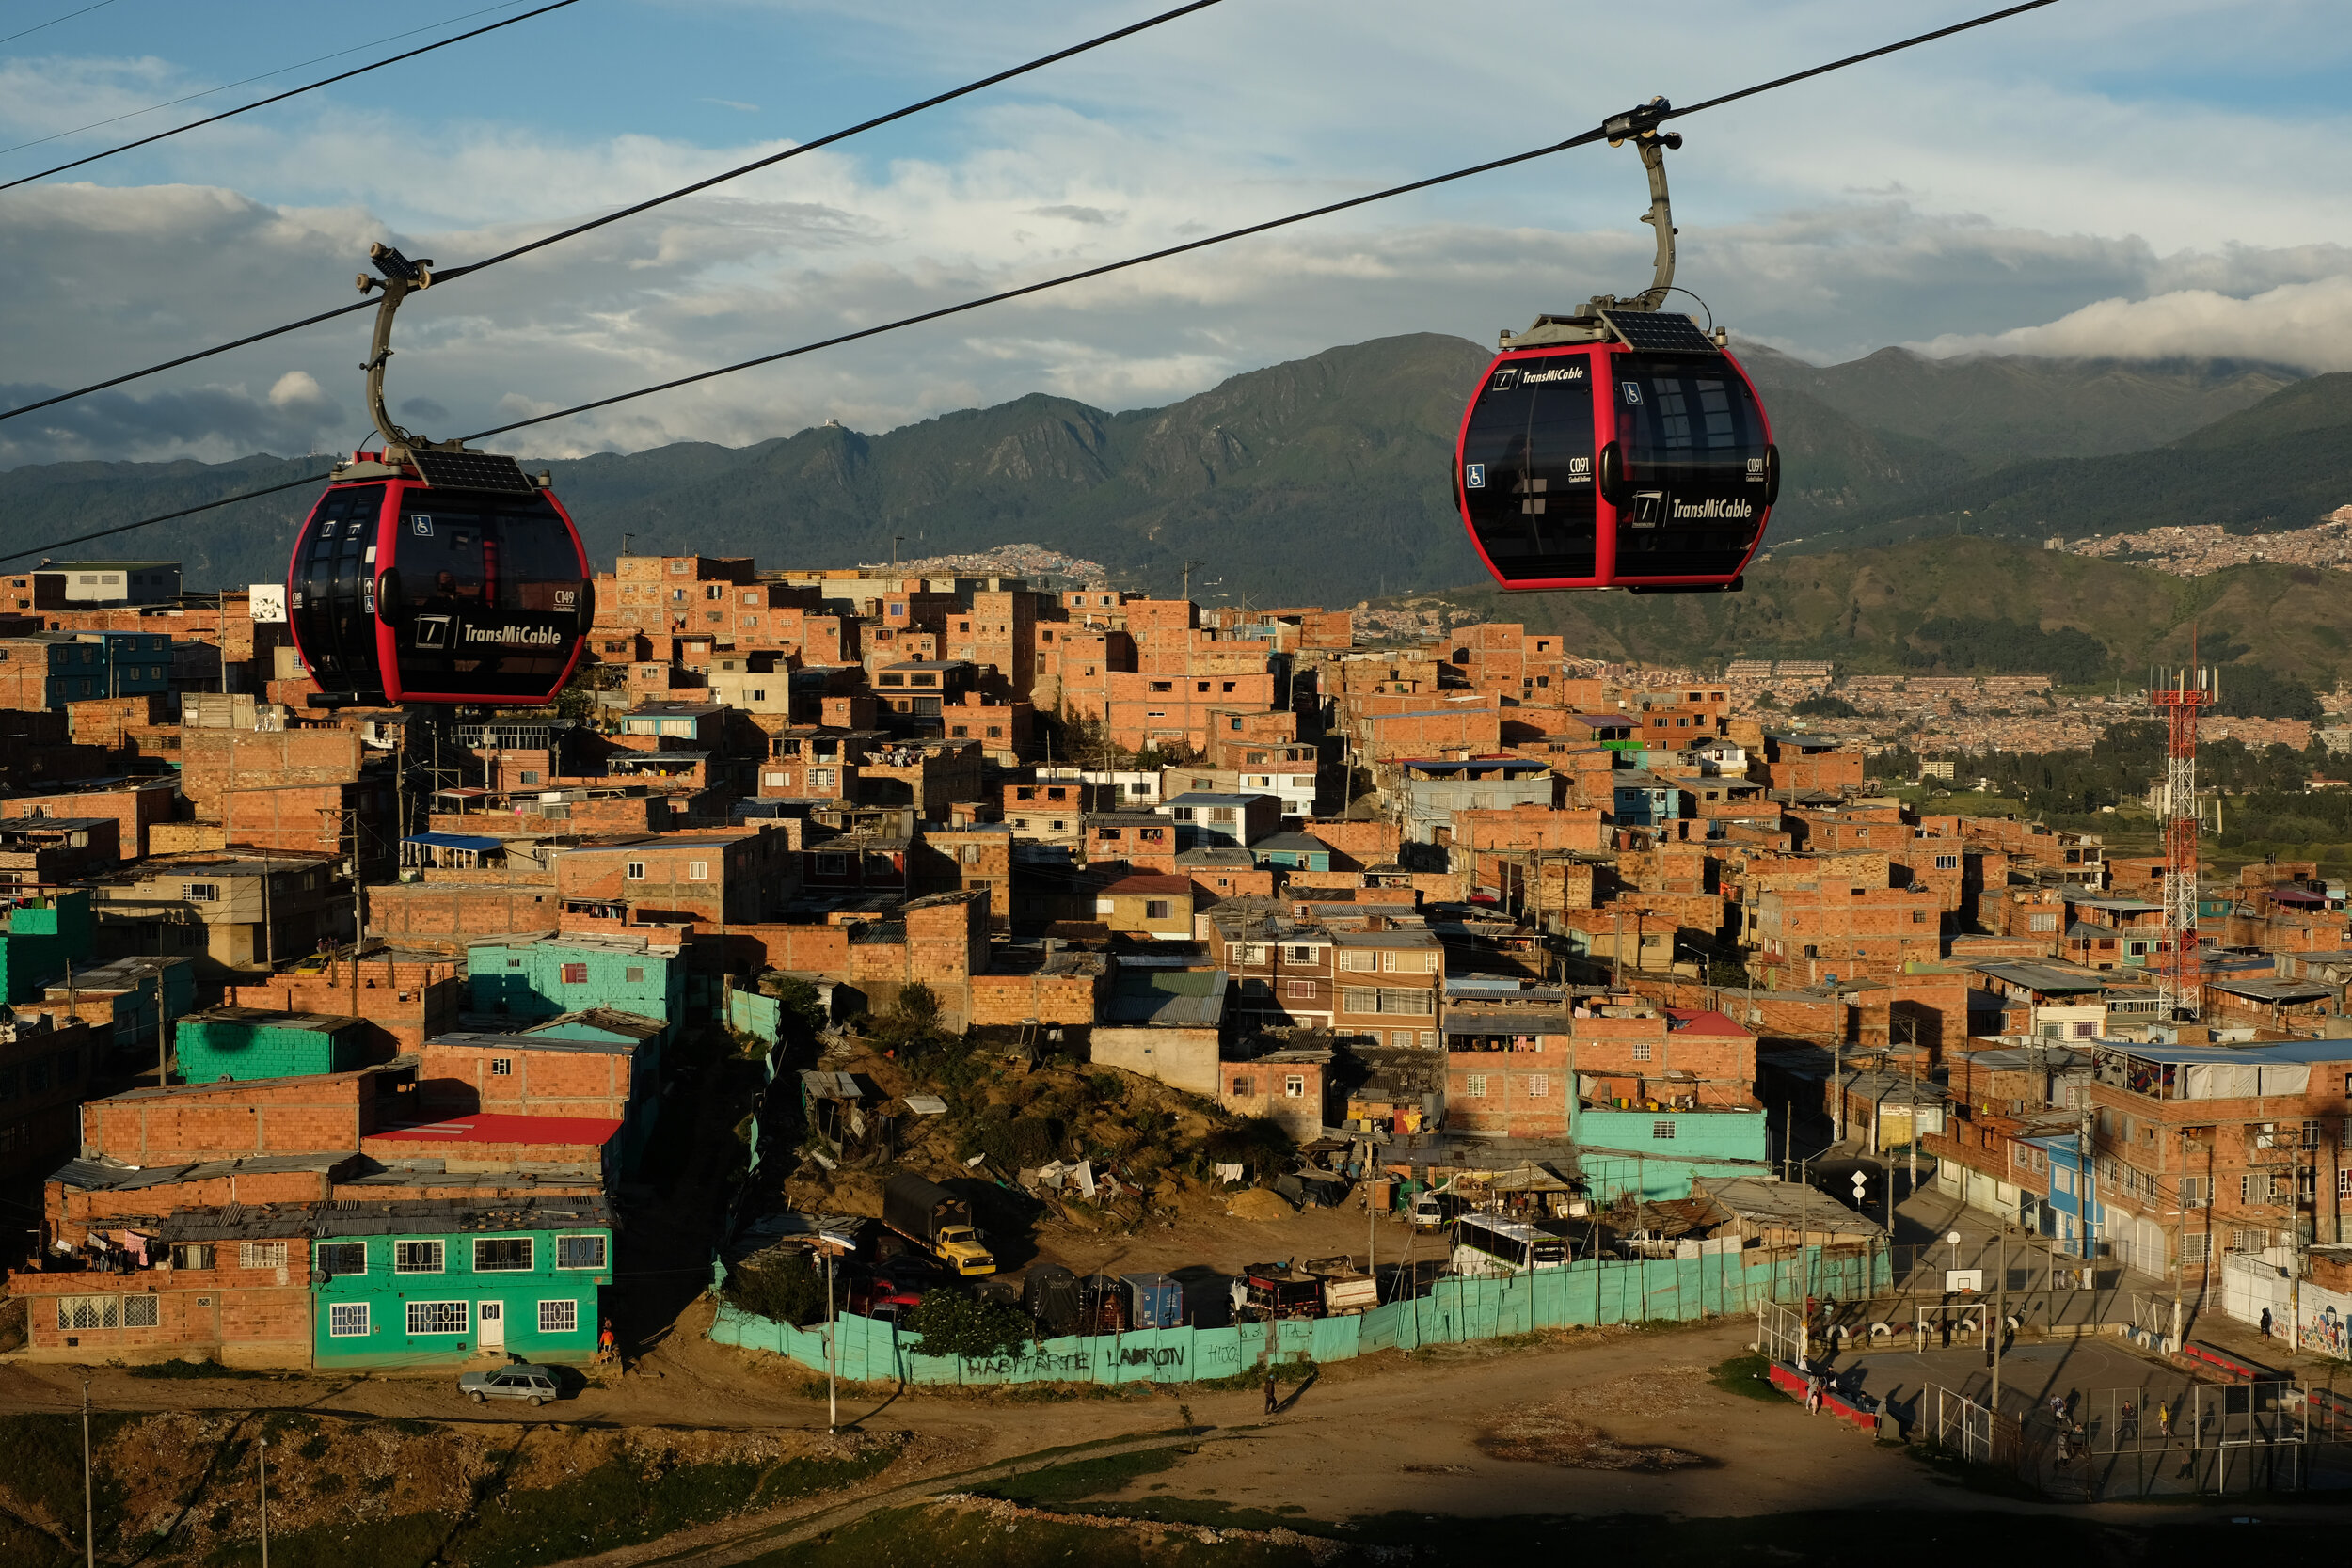  A section of Ciudad Bolívar viewed from an observation platform at Manitas Station, one of four that make up Bogotá’s TransMiCable aerial gondola system. The system was inaugerated in December 2018 to address several mobility problems in this vast d